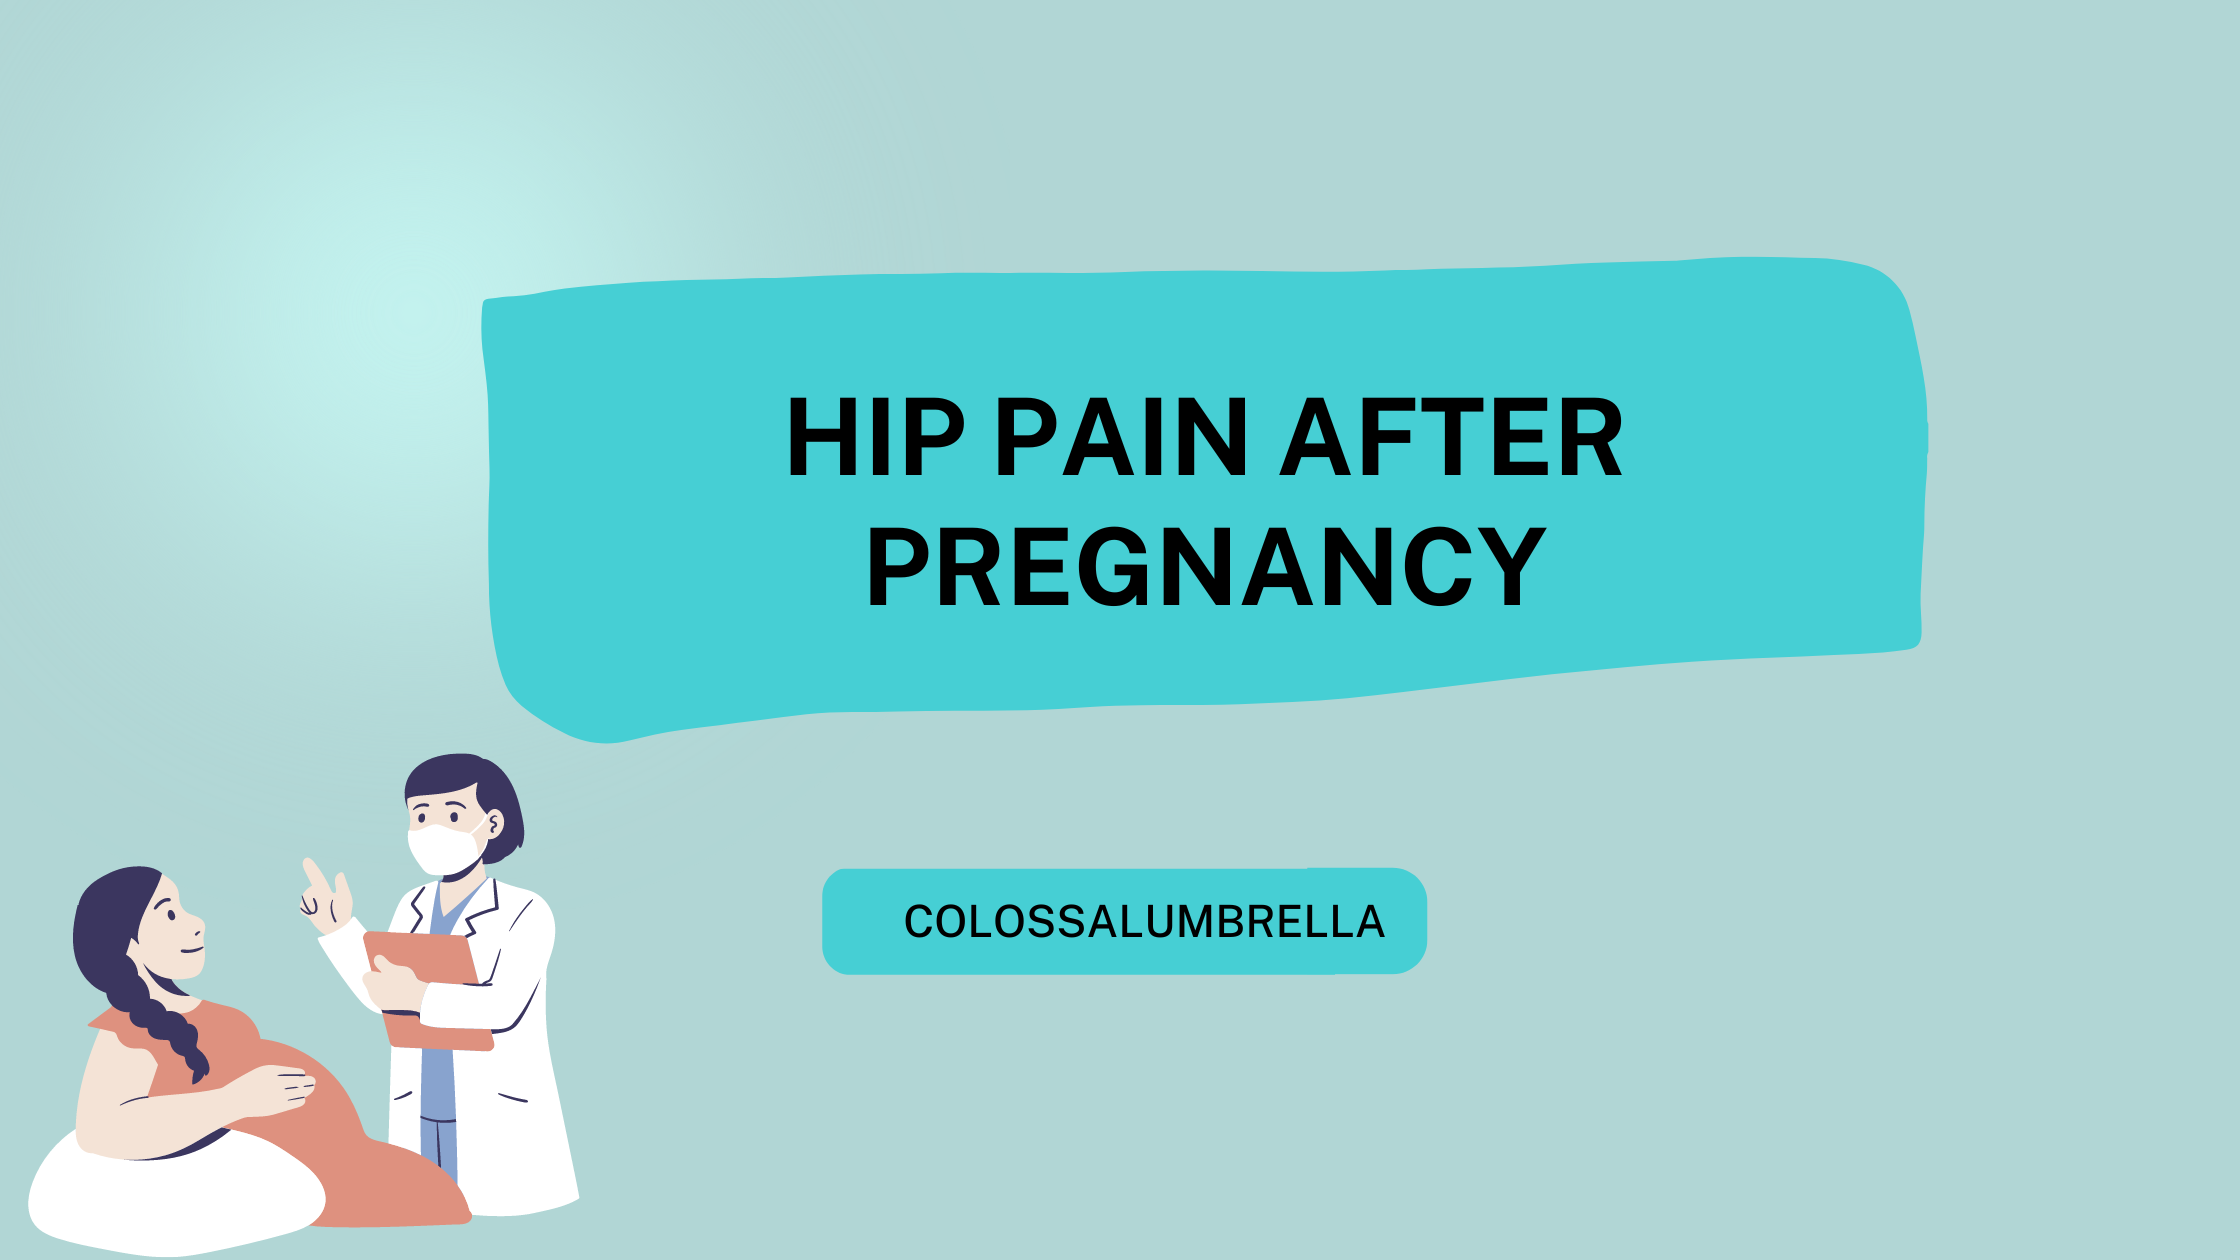 Hip Pain After Pregnancy C Section – Get pain relief with these 8 effective tips